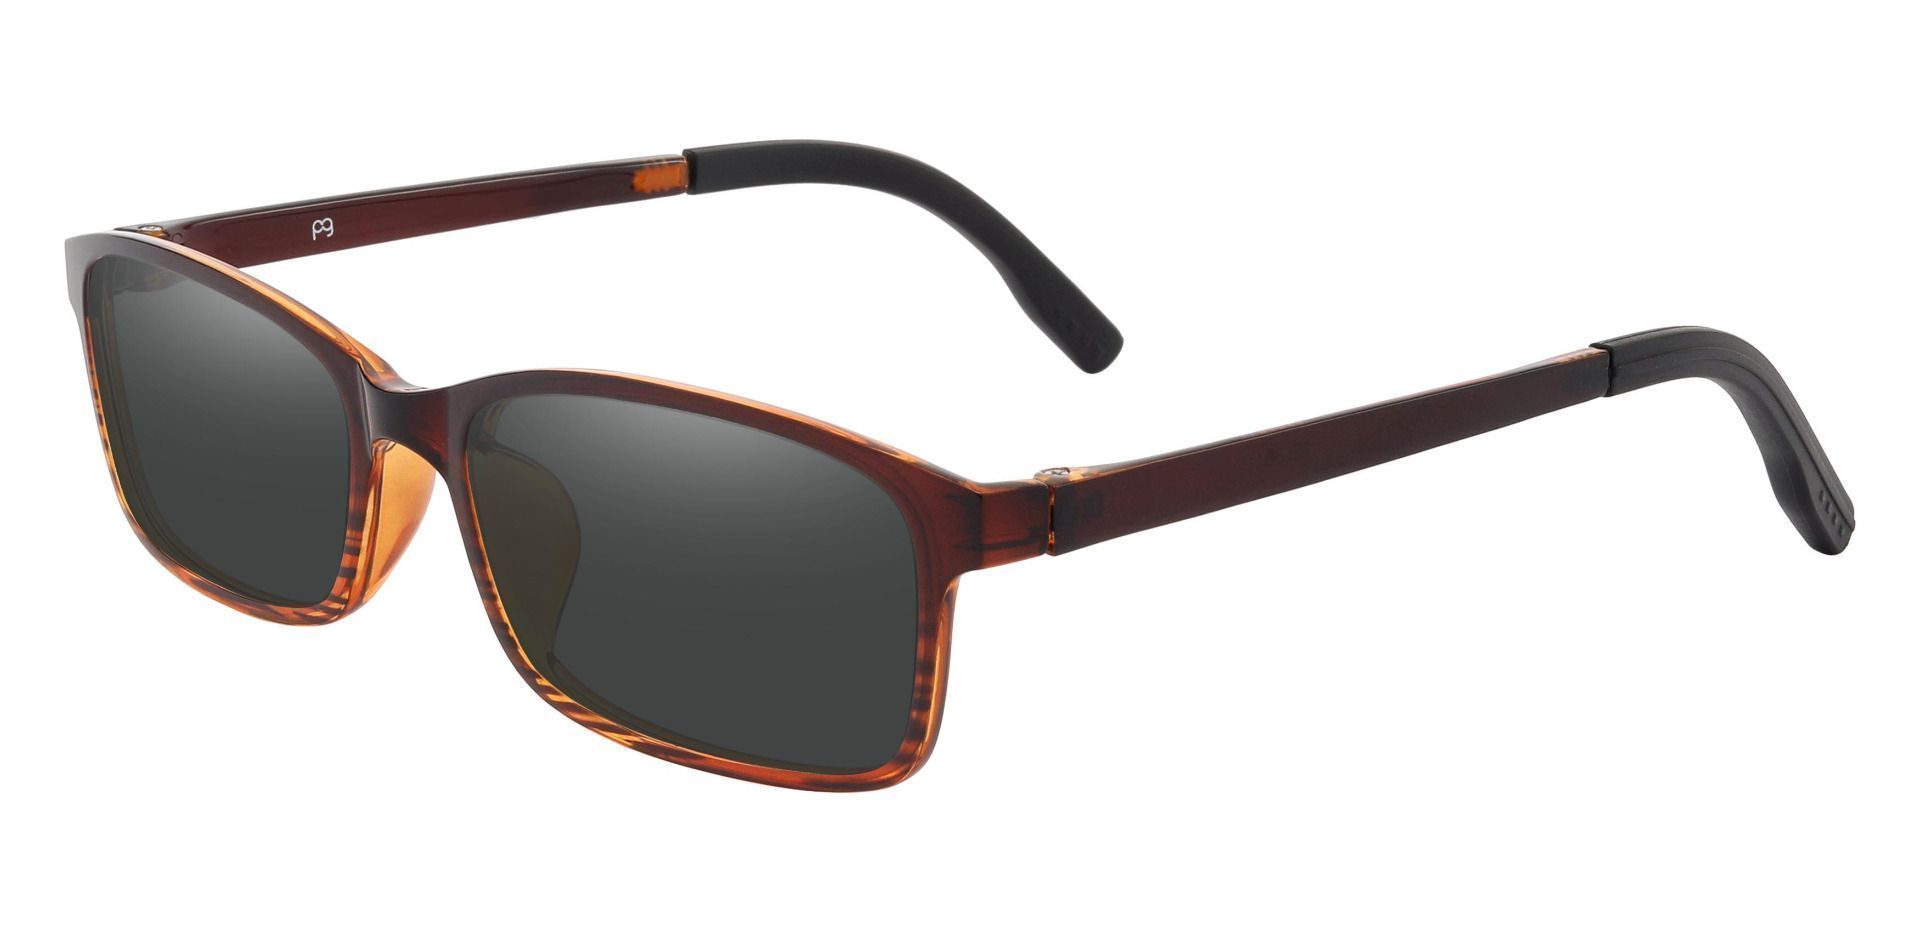 Inman Rectangle Prescription Sunglasses - Brown Frame With Gray Lenses